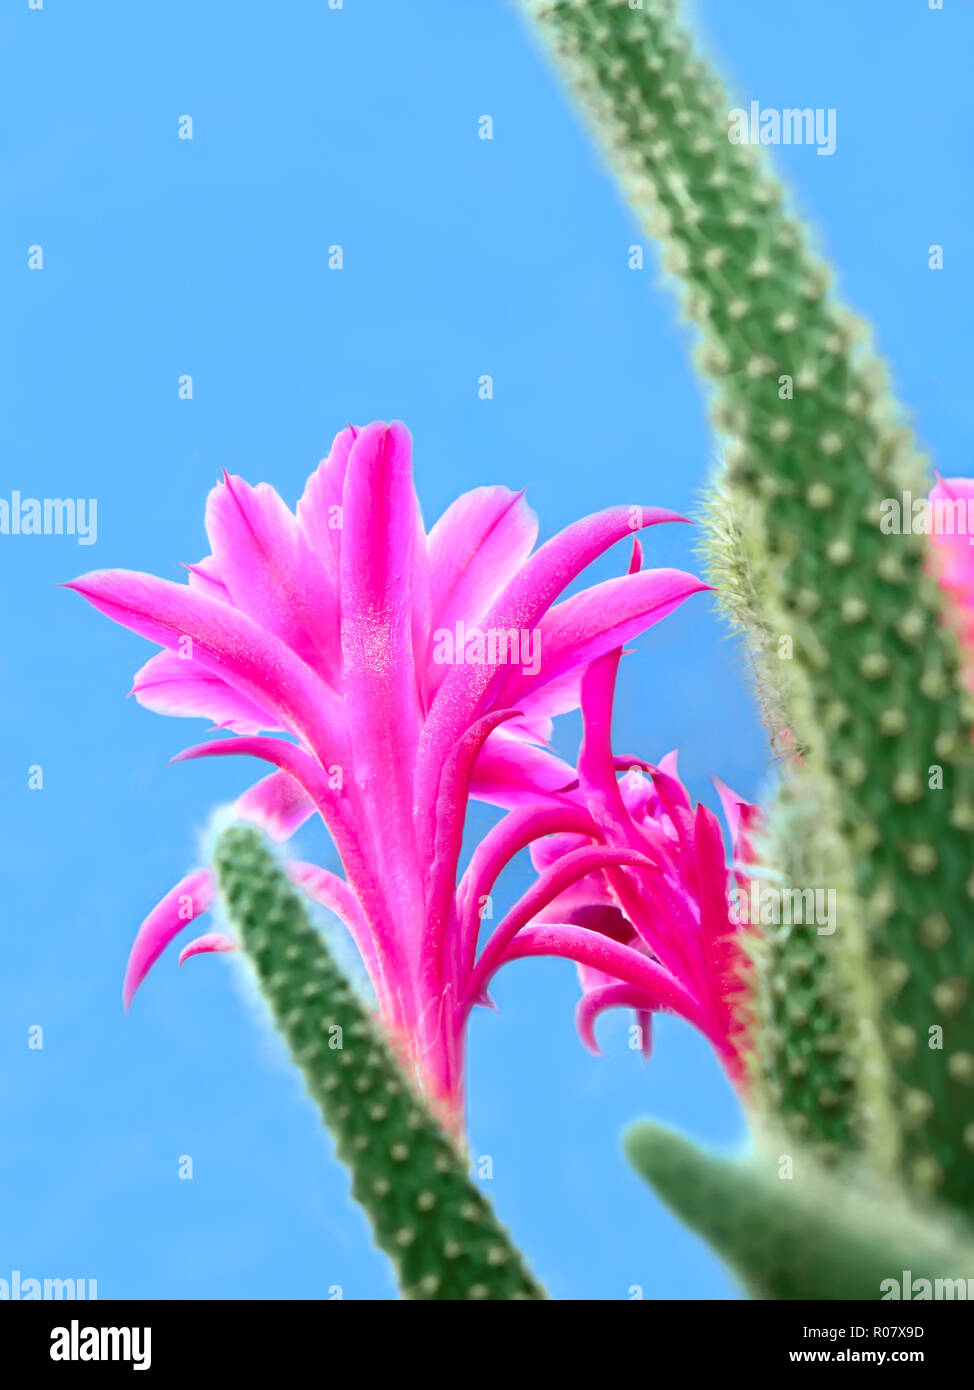 A cactus flowers on a blue background Stock Photo